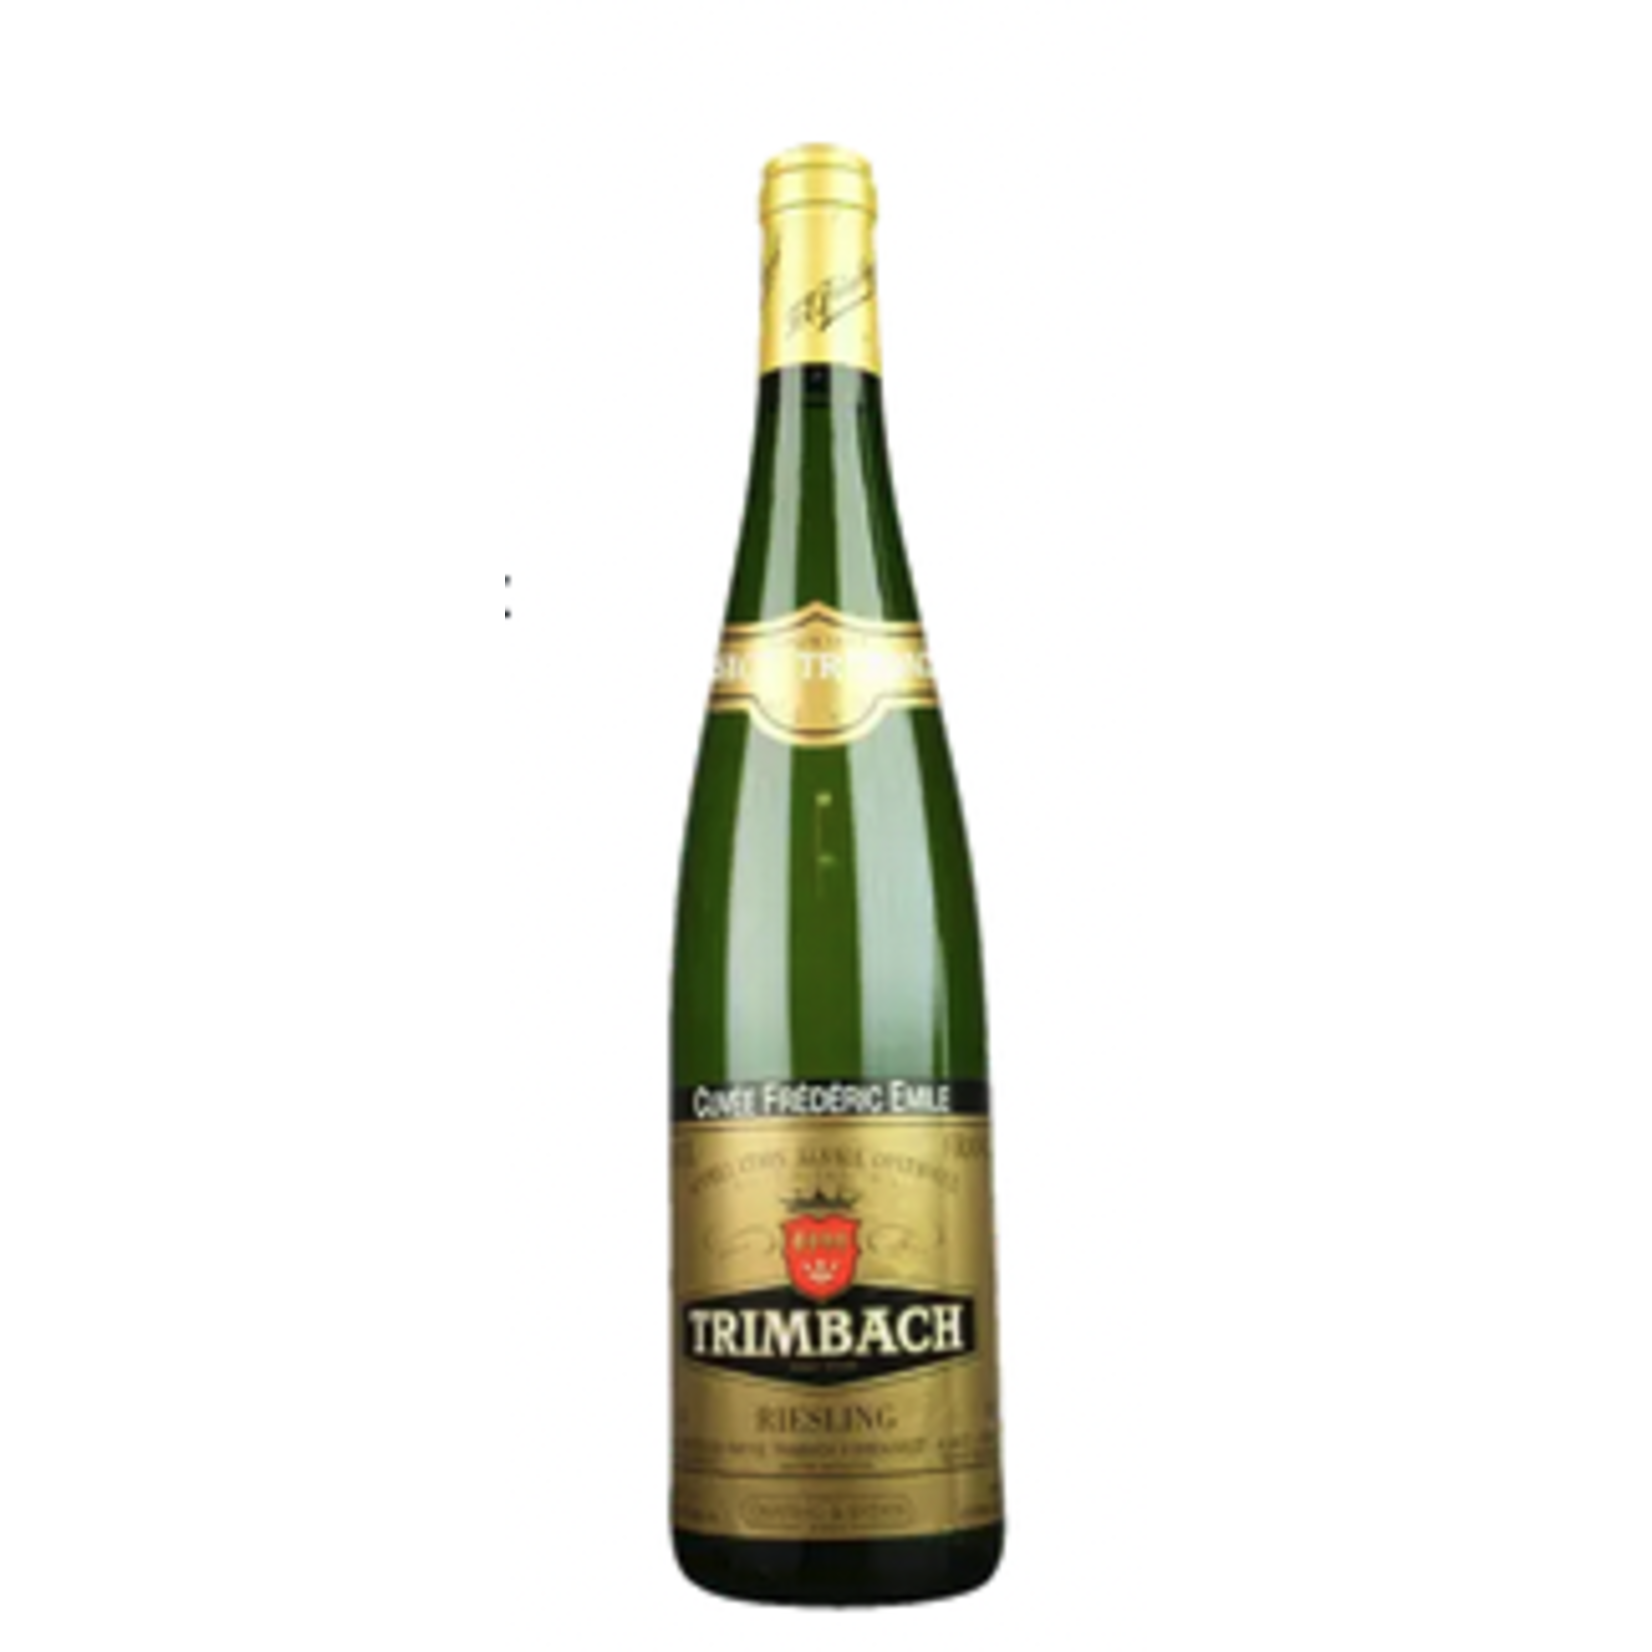 Wine Trimbach Riesling Cuvee Frederic Emile 2007